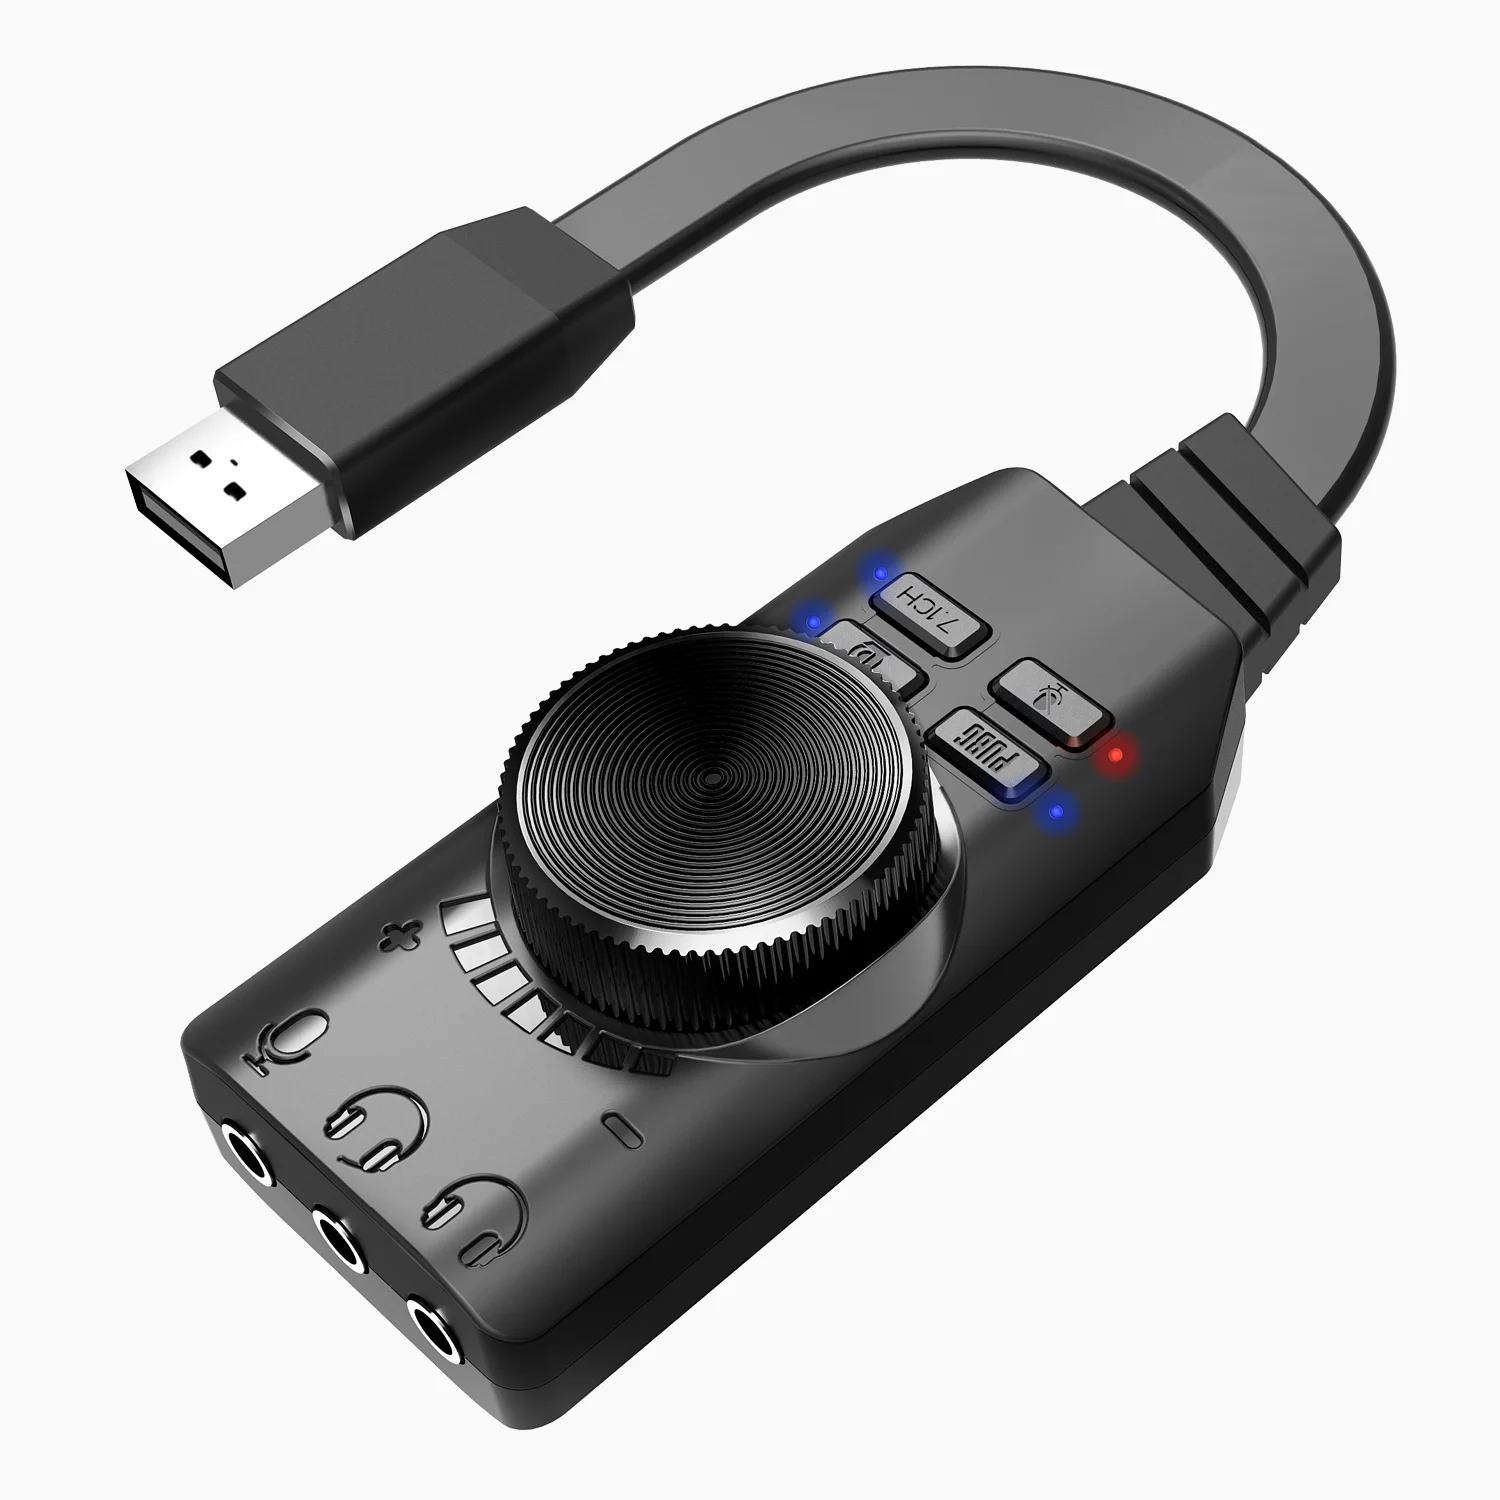 Wholesale Sound Card USB Audio Interface External 3.5mm Microphone Audio Adapter Soundcard for Laptop Headset USB Sound Card m.alibaba.com